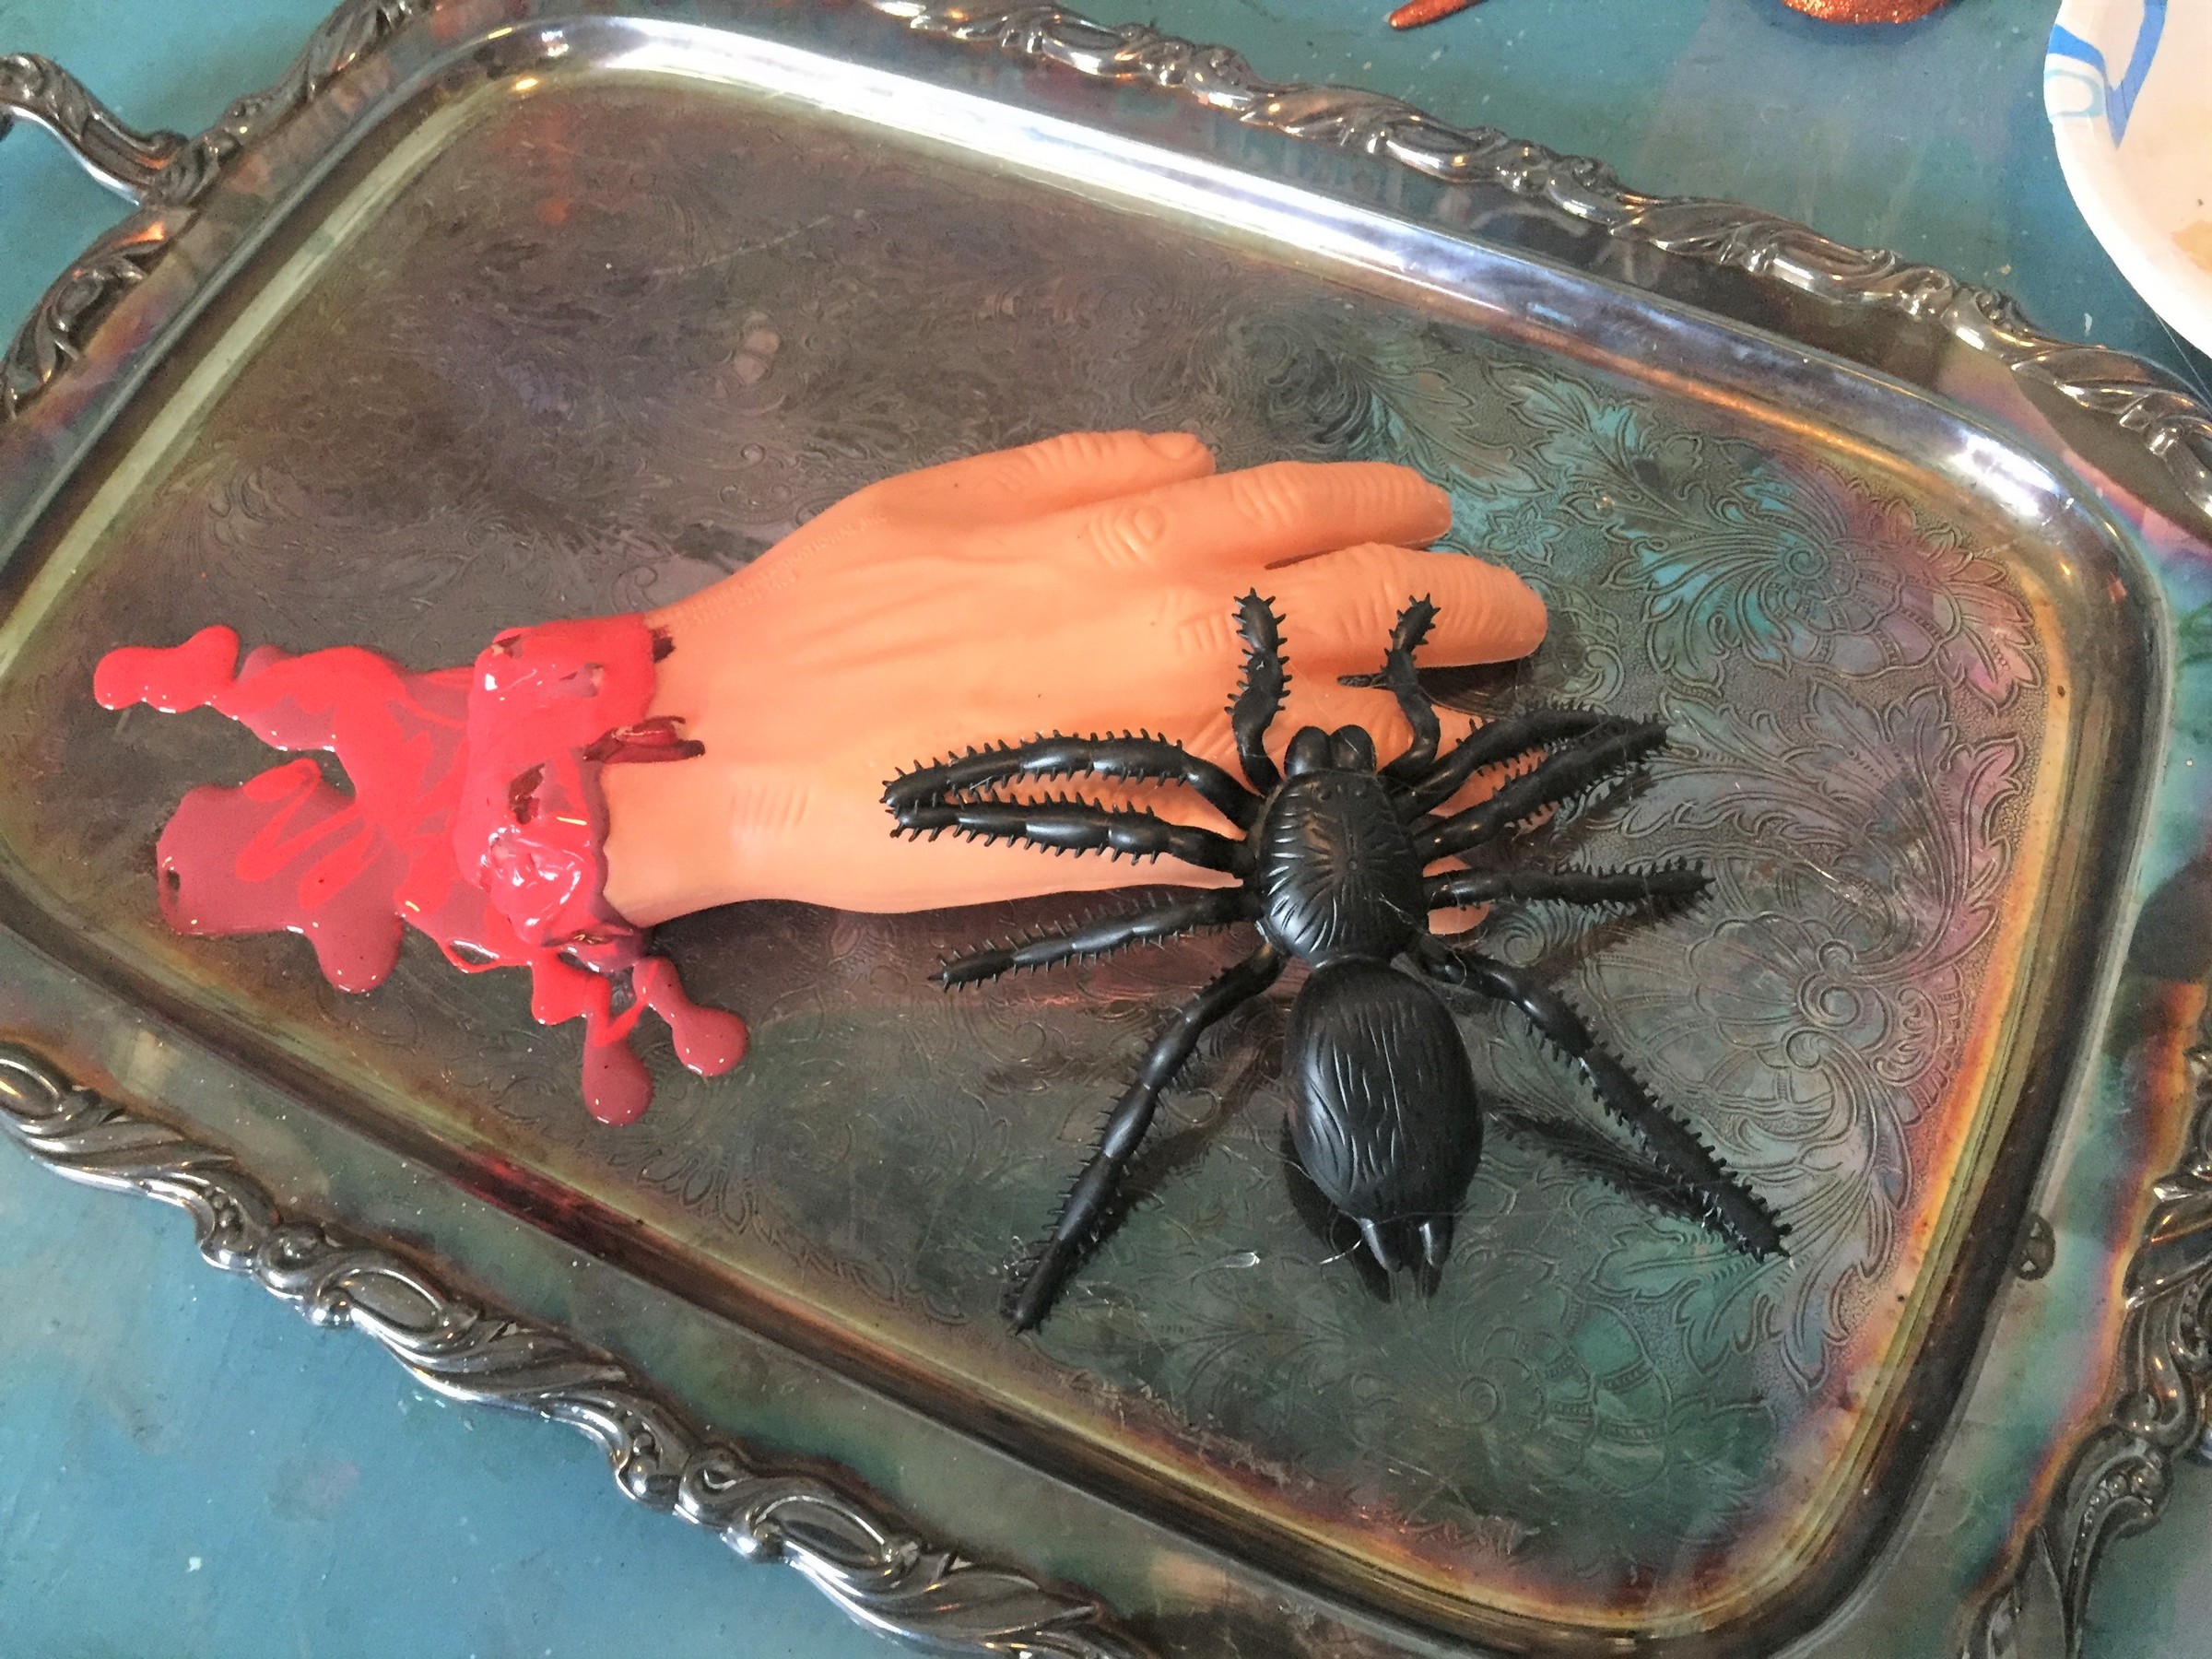 Tim glues a fake hand and spiders to a serving tray from Goodwill